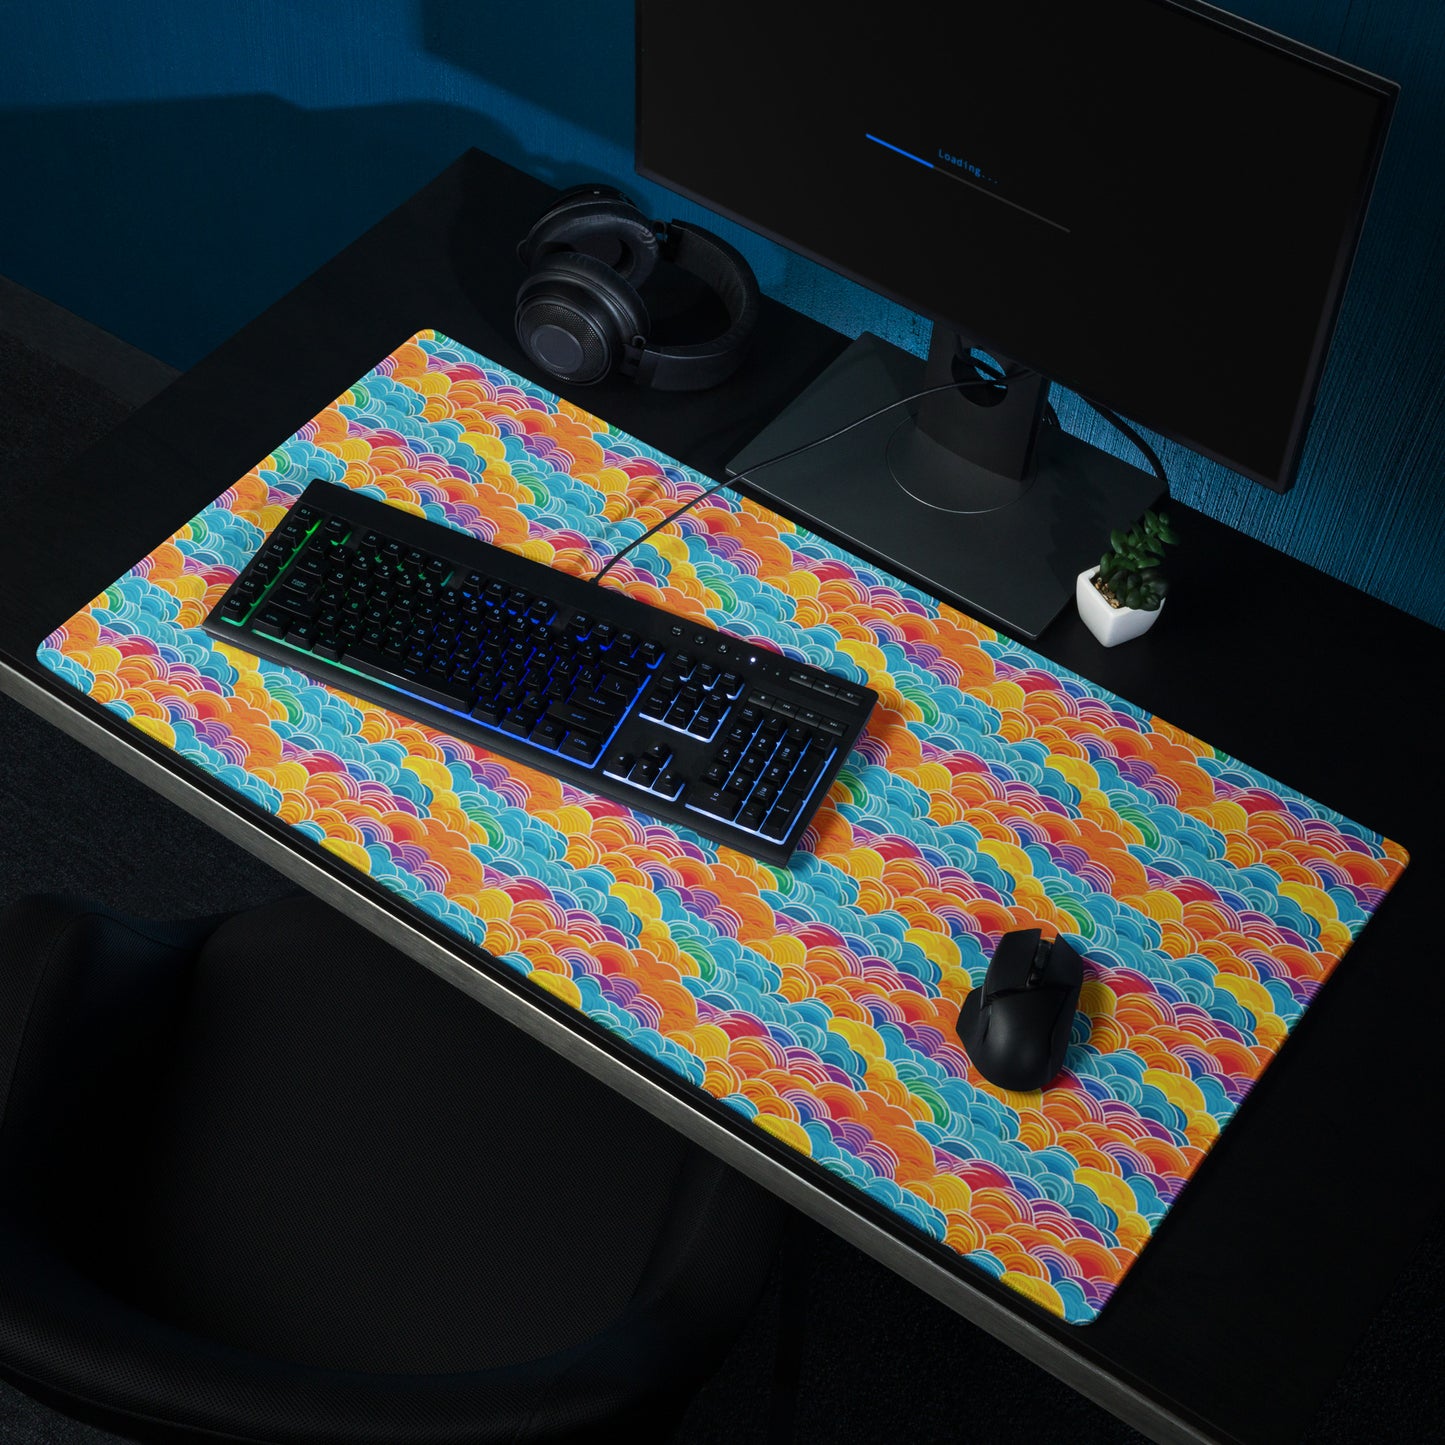 A 36" x 18" desk pad with bubbly swirly clouds all over it shown on a desk setup. Rainbow colored.